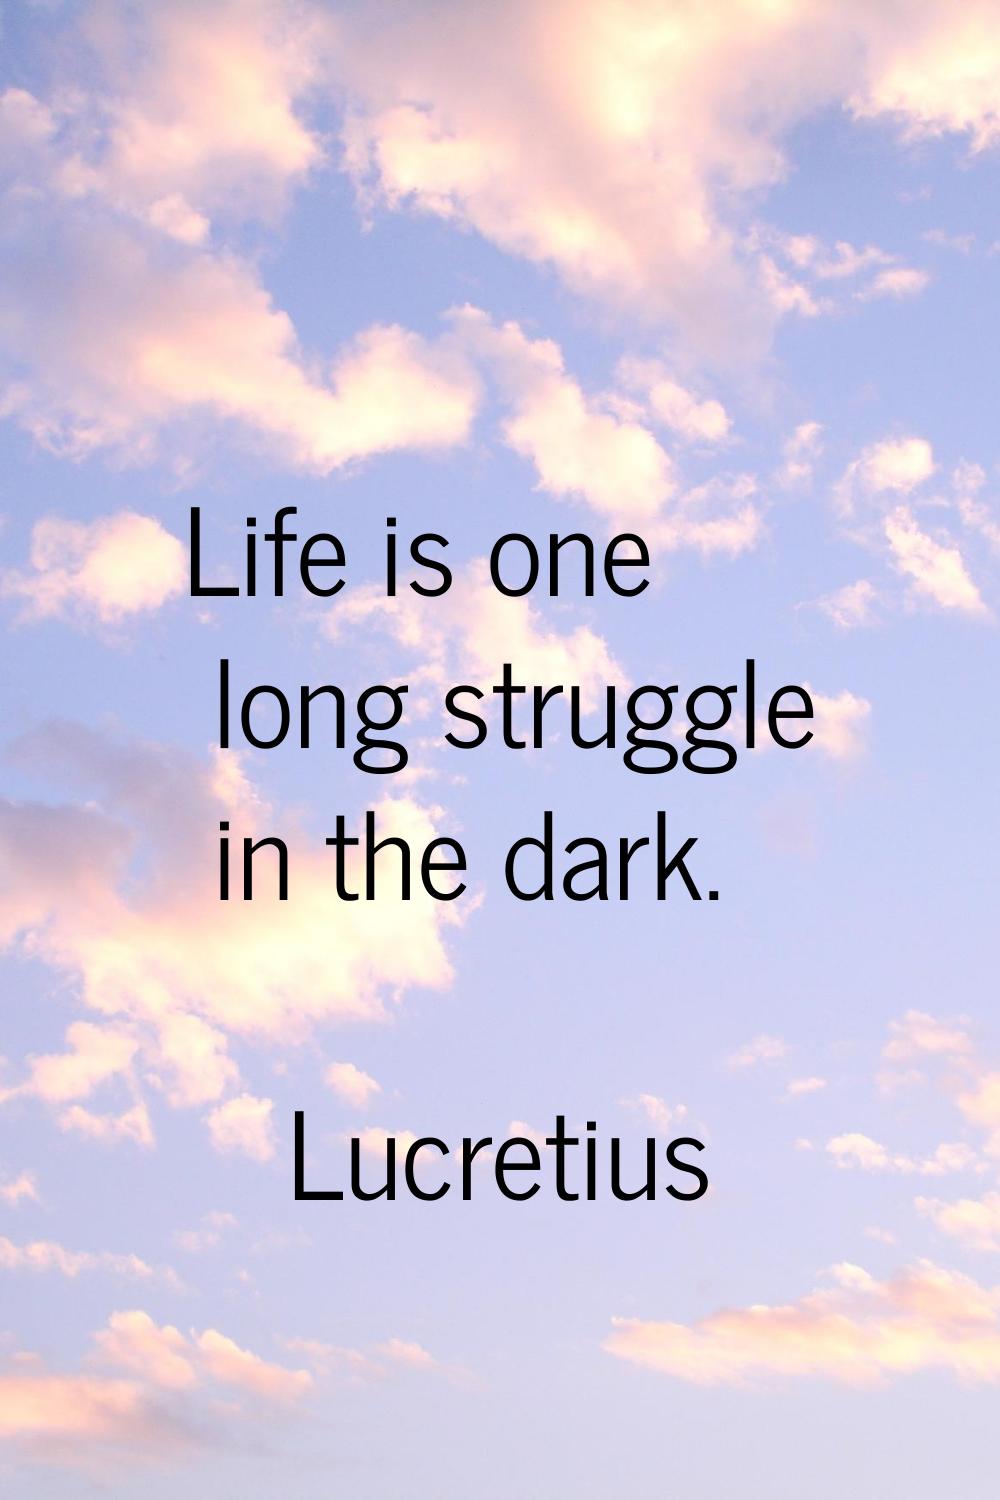 Life is one long struggle in the dark.